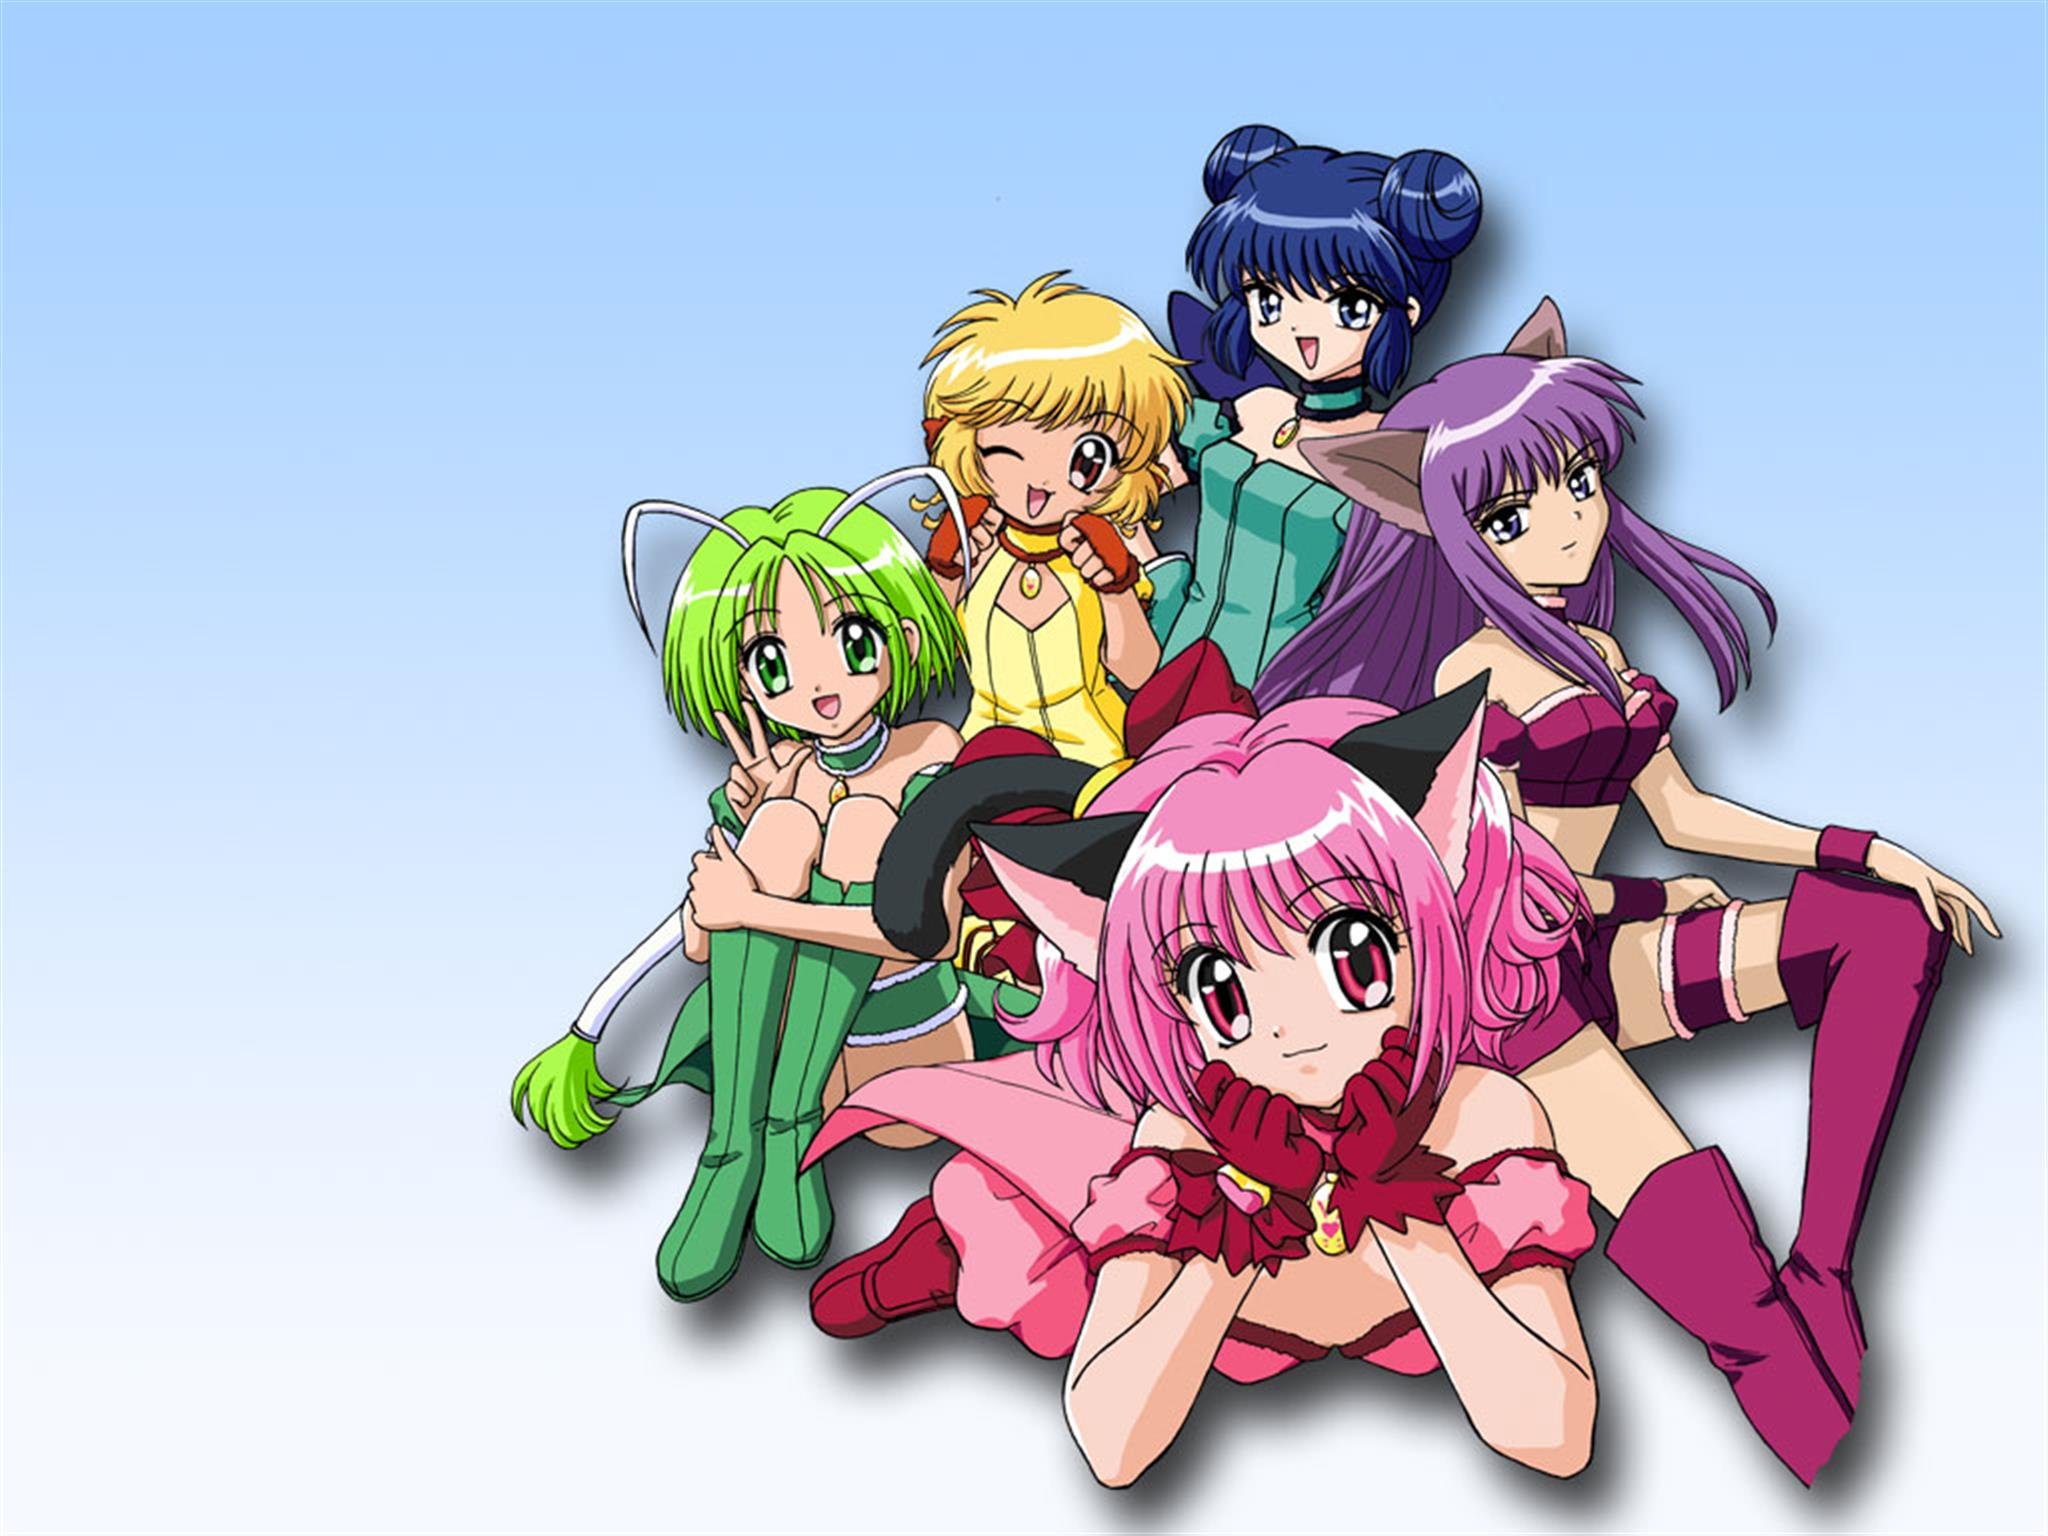 tokyo, Mew, Mew, Meow, Meow, Power Wallpapers HD / Desktop and Mobile Backg...